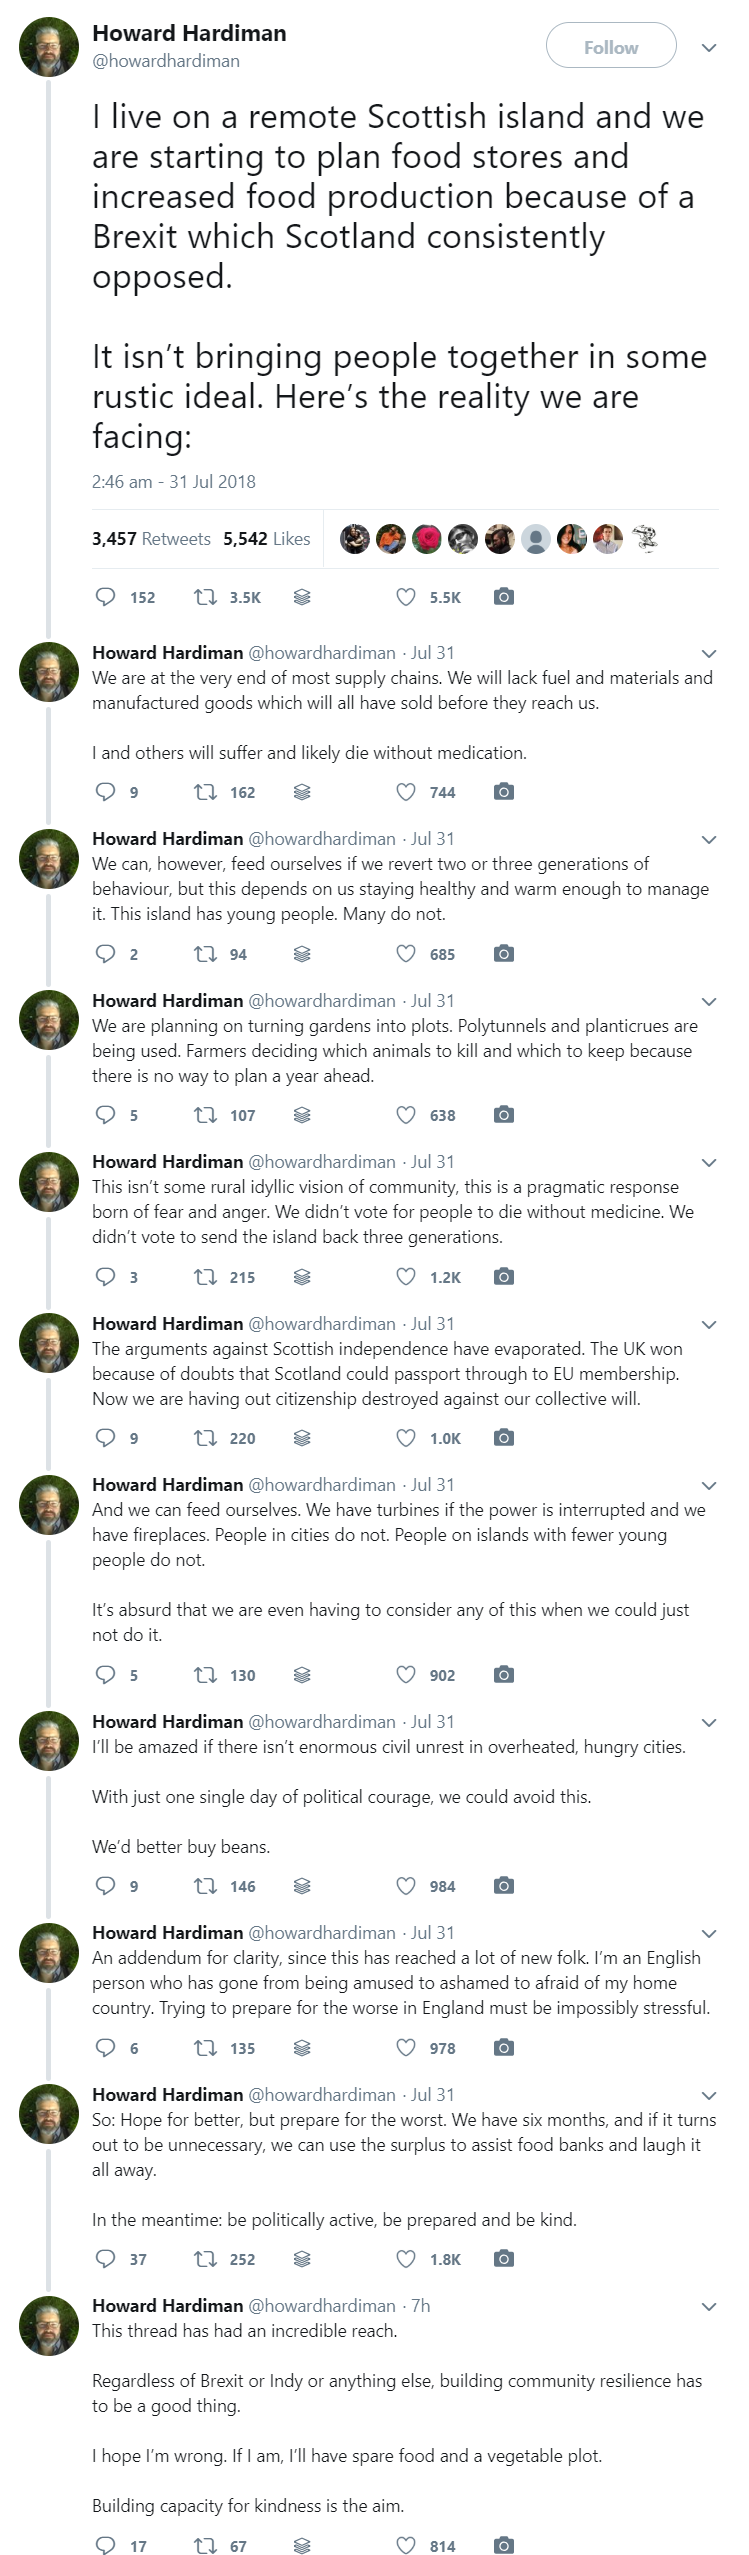 Howard Hardiman's tweets about stockpiling food for Brexit in Scotland